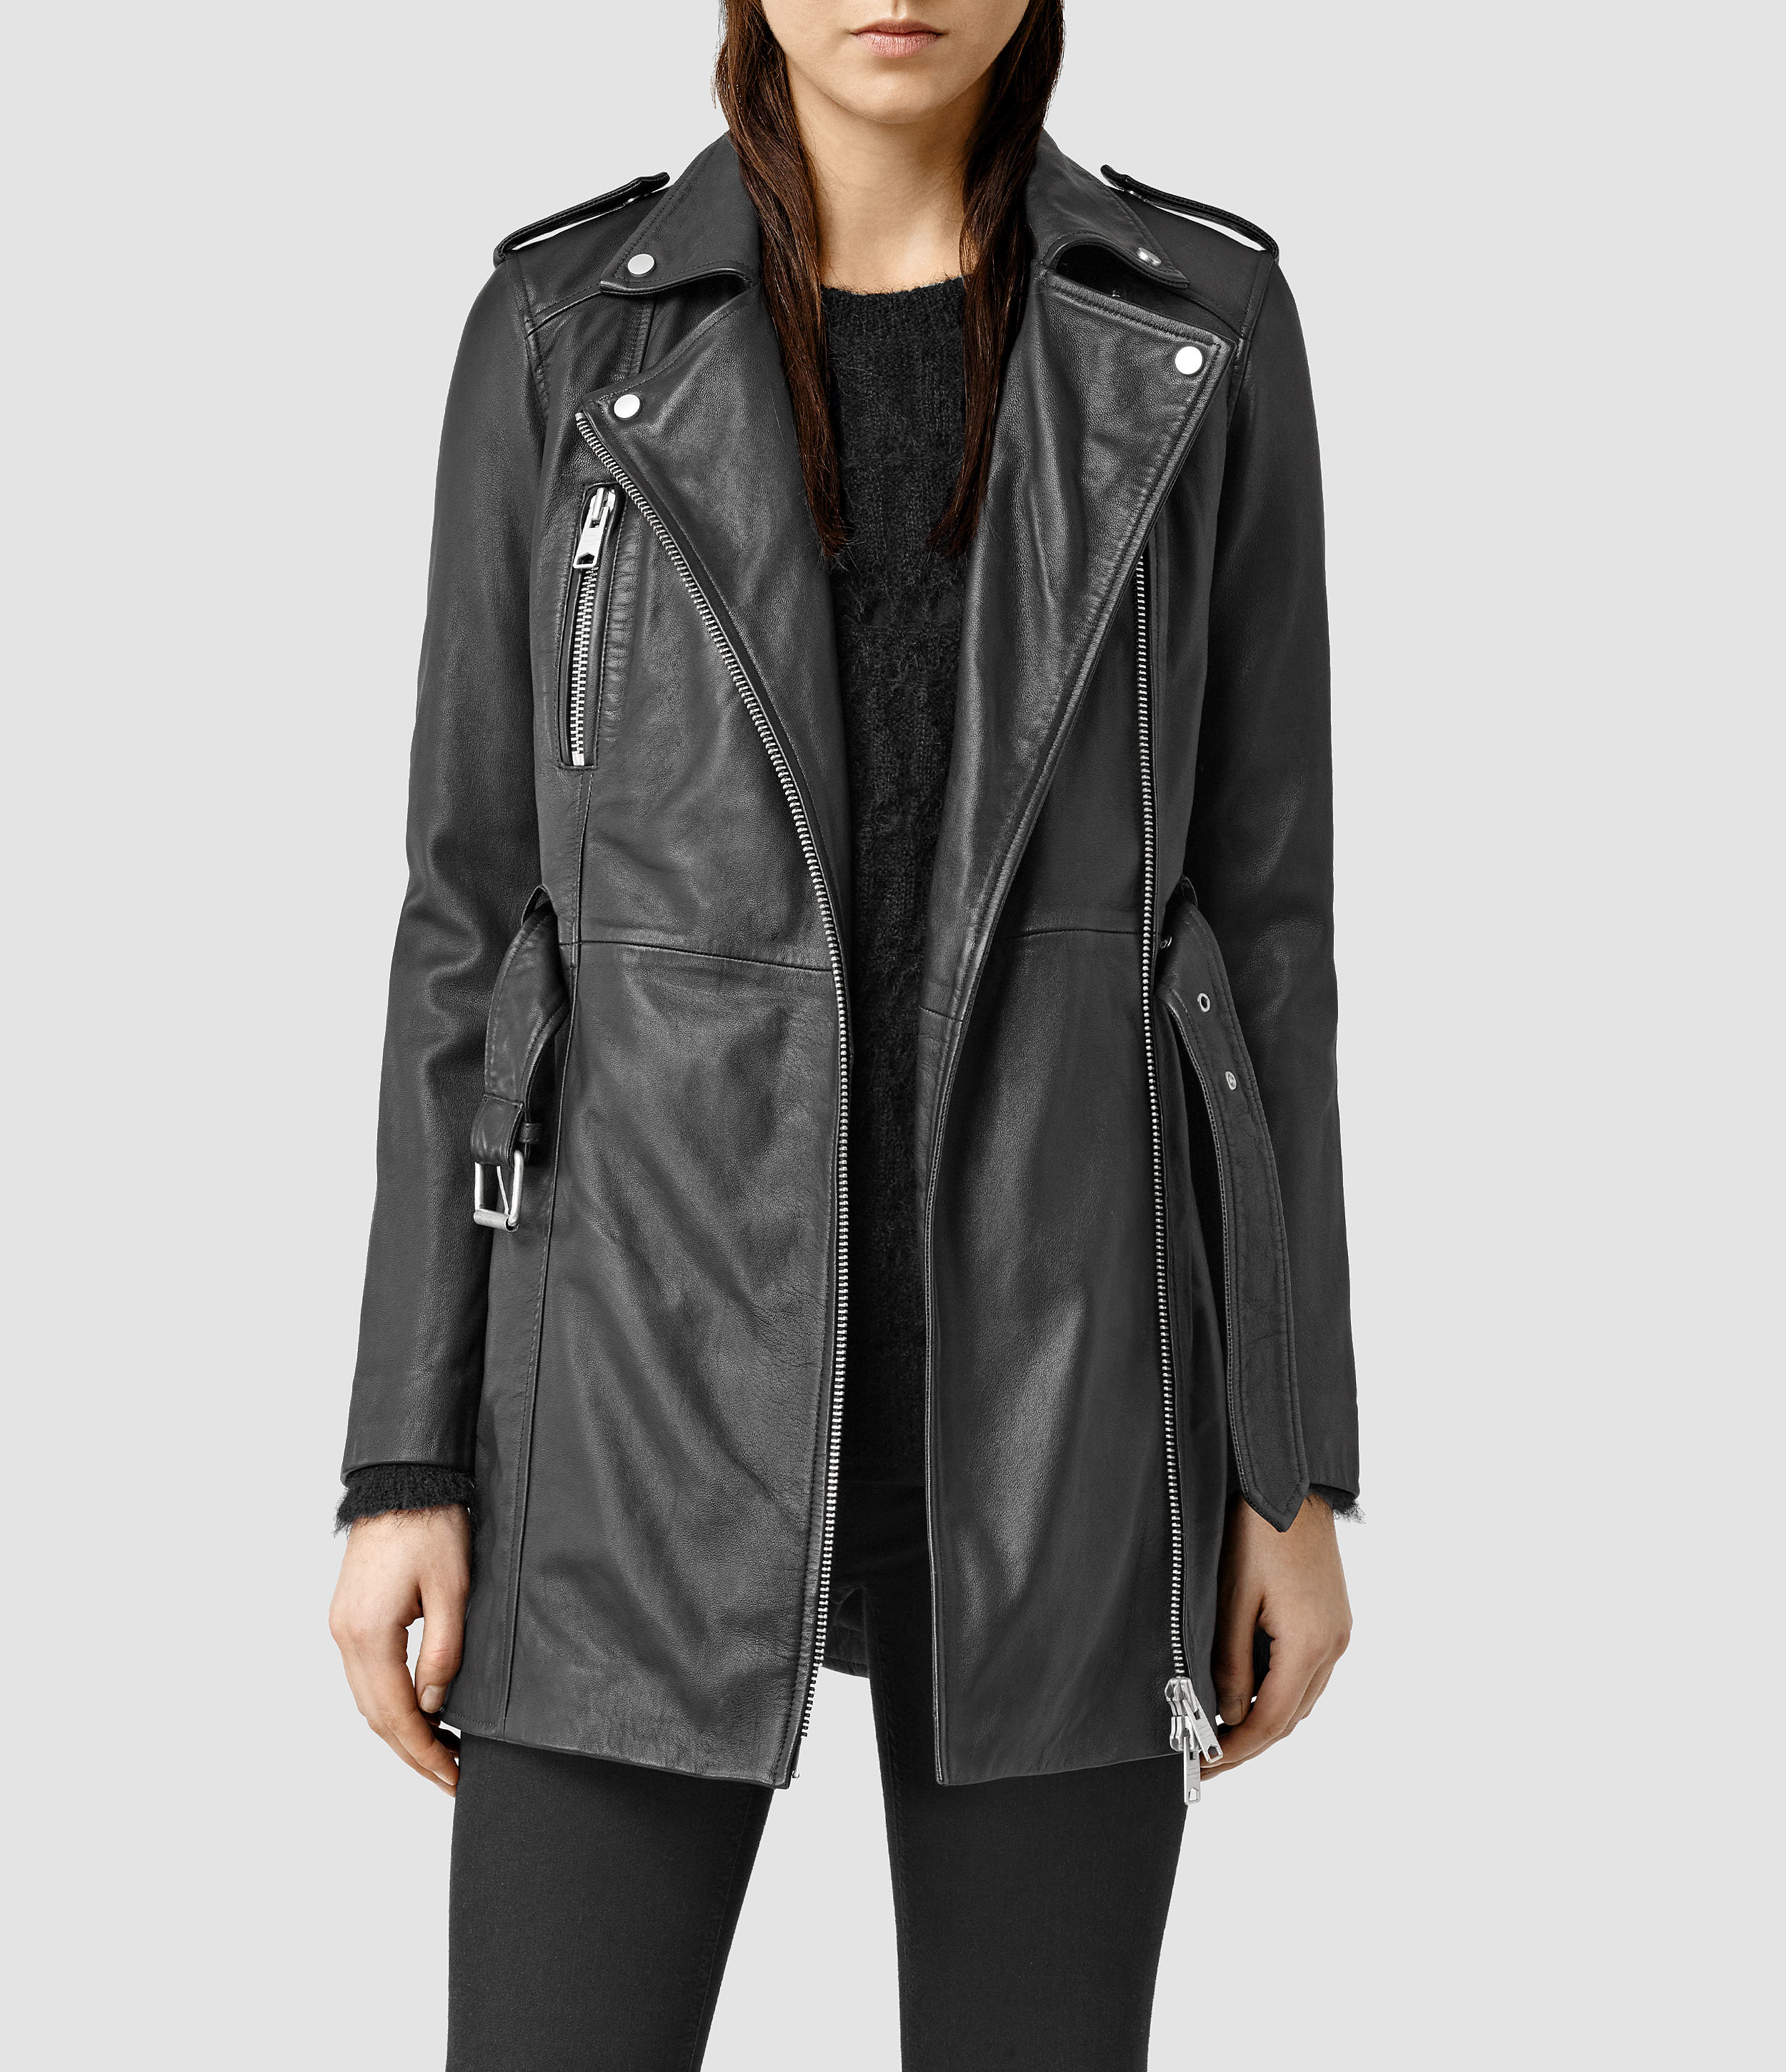 ALLSAINTS  Iconic Leather Jackets, Clothing & Accessories